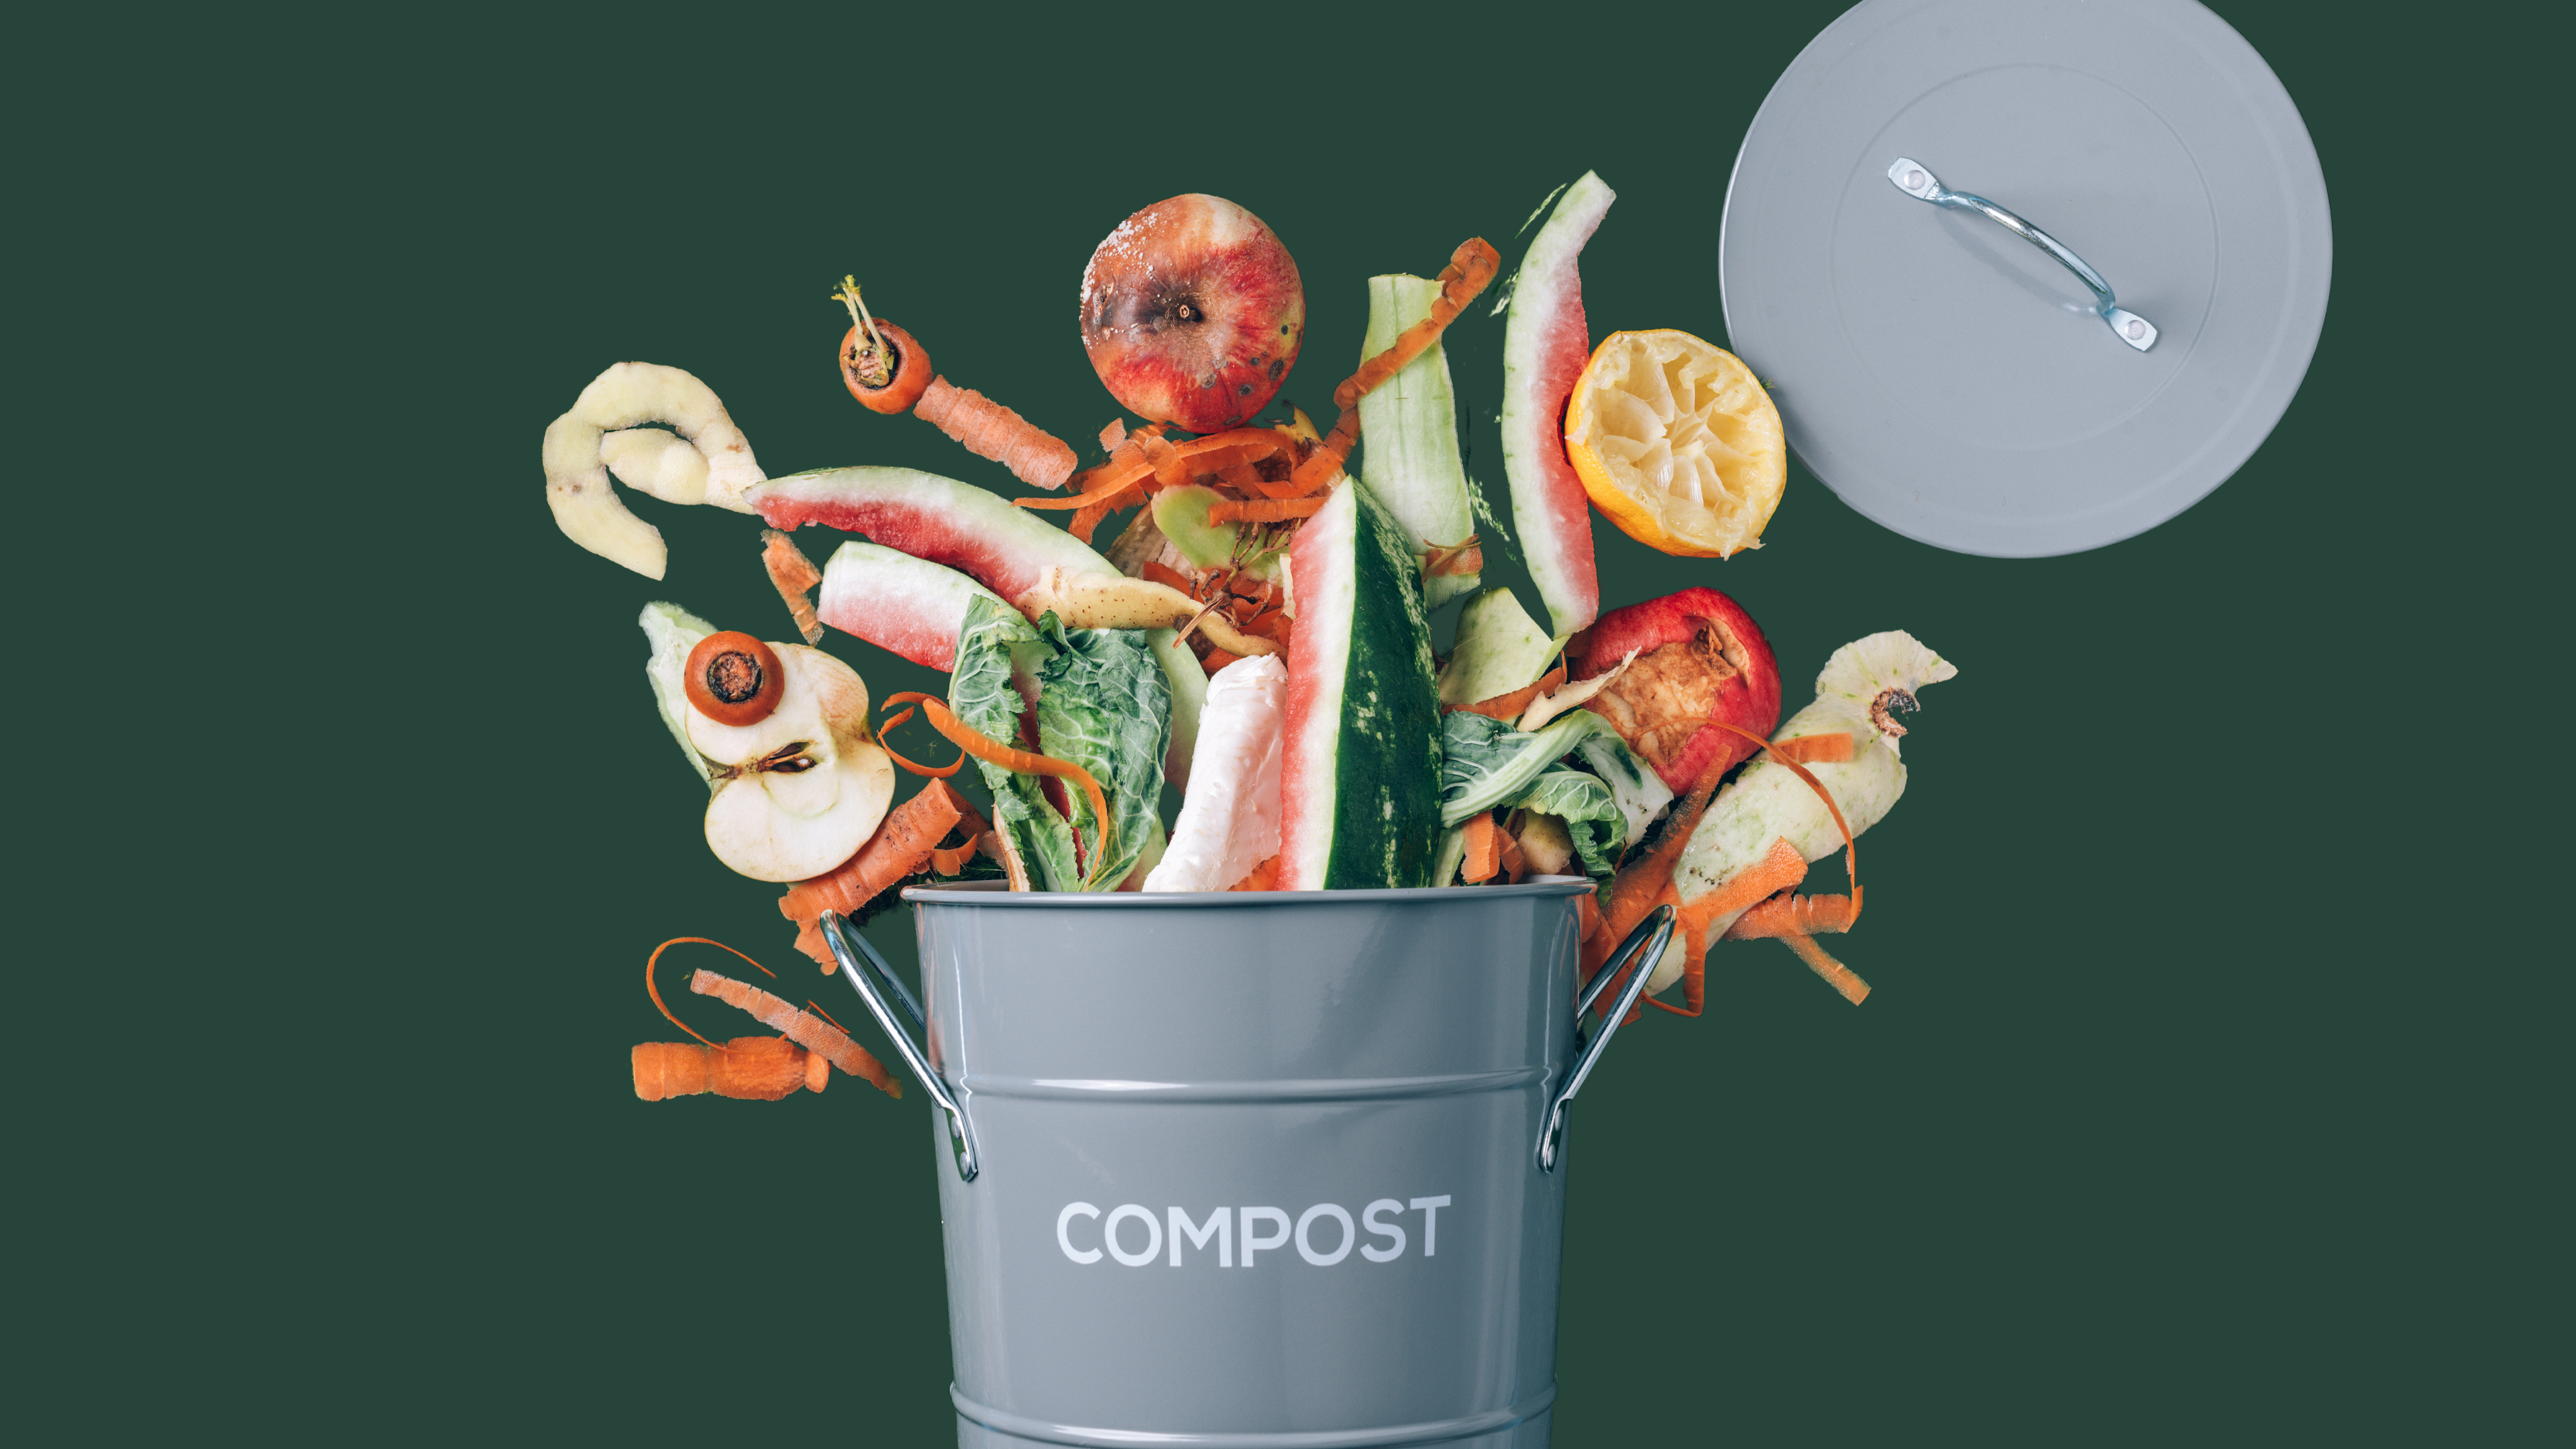 Should your takeout packaging go in the recycling bin, compost